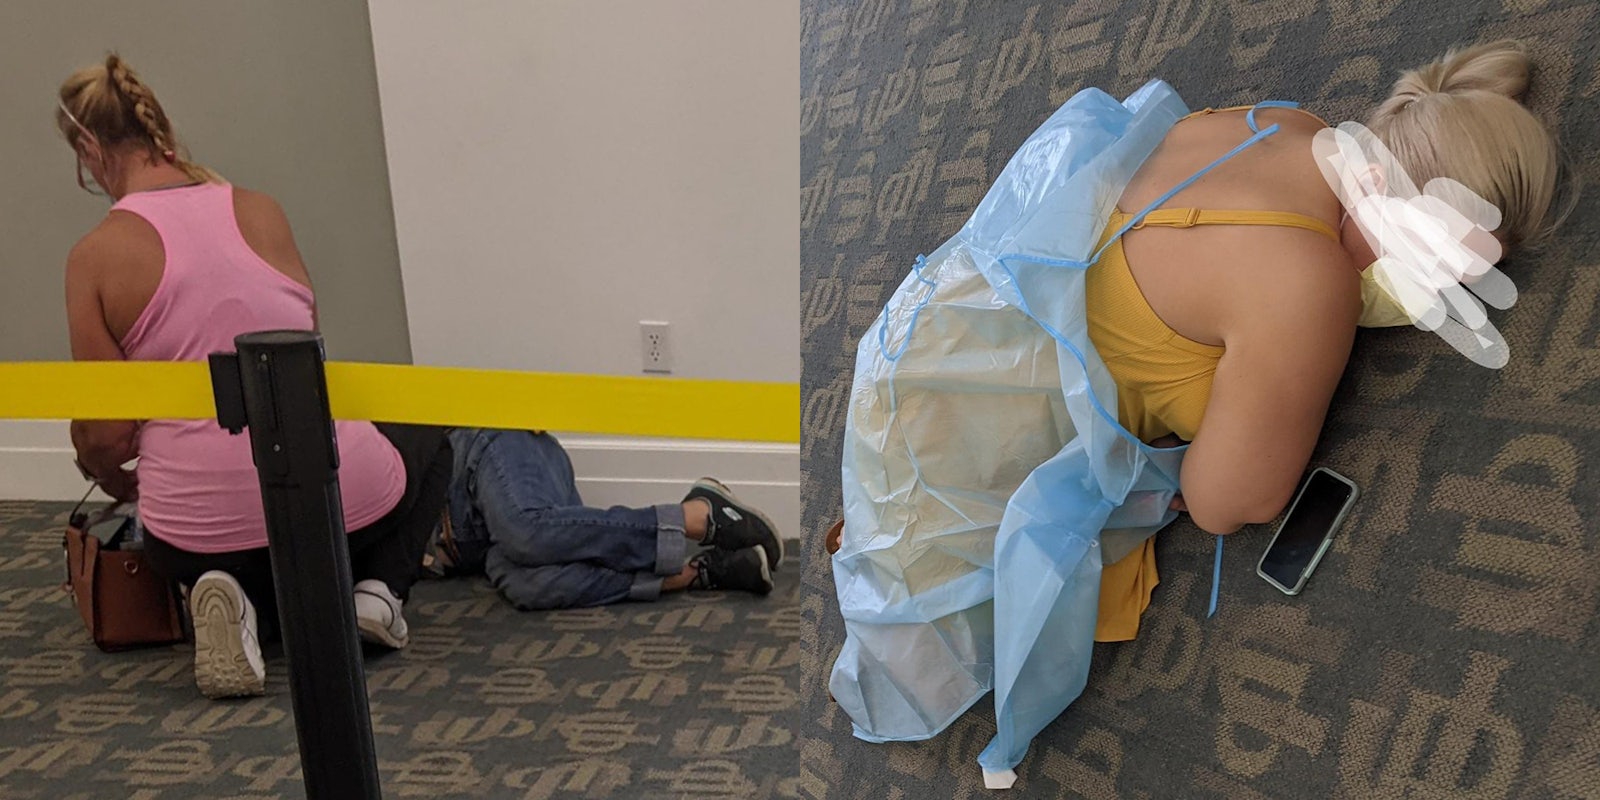 people lying on the floor in the hospital